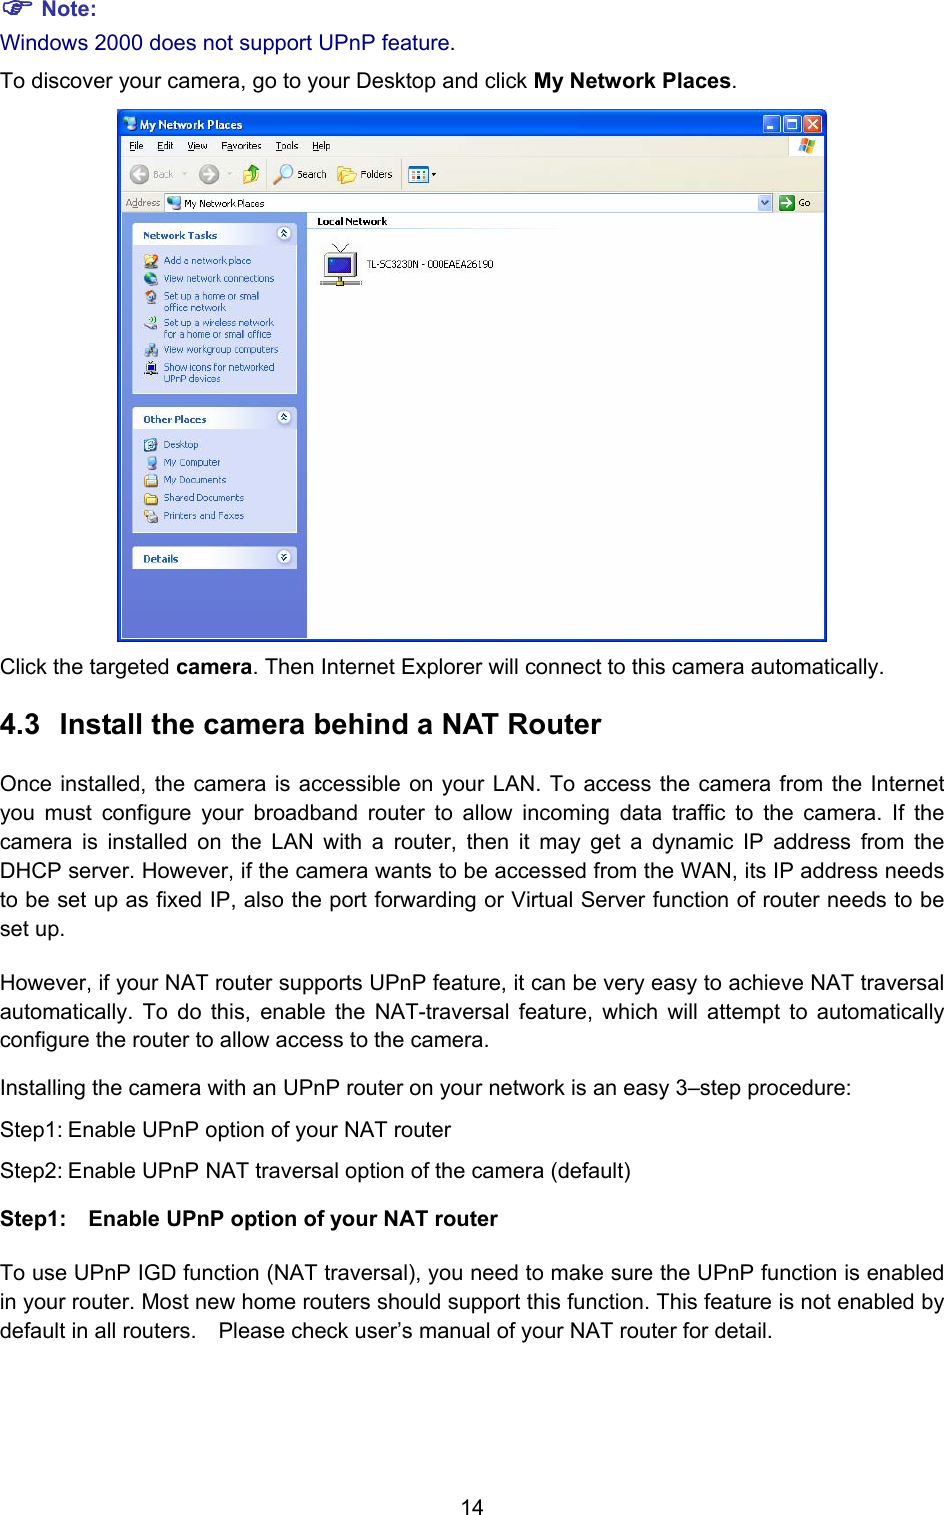  14 ) Note: Windows 2000 does not support UPnP feature. To discover your camera, go to your Desktop and click My Network Places.  Click the targeted camera. Then Internet Explorer will connect to this camera automatically. 4.3  Install the camera behind a NAT Router Once installed, the camera is accessible on your LAN. To access the camera from the Internet you must configure your broadband router to allow incoming data traffic to the camera. If the camera is installed on the LAN with a router, then it may get a dynamic IP address from the DHCP server. However, if the camera wants to be accessed from the WAN, its IP address needs to be set up as fixed IP, also the port forwarding or Virtual Server function of router needs to be set up.   However, if your NAT router supports UPnP feature, it can be very easy to achieve NAT traversal automatically. To do this, enable the NAT-traversal feature, which will attempt to automatically configure the router to allow access to the camera.   Installing the camera with an UPnP router on your network is an easy 3–step procedure: Step1: Enable UPnP option of your NAT router Step2: Enable UPnP NAT traversal option of the camera (default) Step1:  Enable UPnP option of your NAT router   To use UPnP IGD function (NAT traversal), you need to make sure the UPnP function is enabled in your router. Most new home routers should support this function. This feature is not enabled by default in all routers.    Please check user’s manual of your NAT router for detail.  